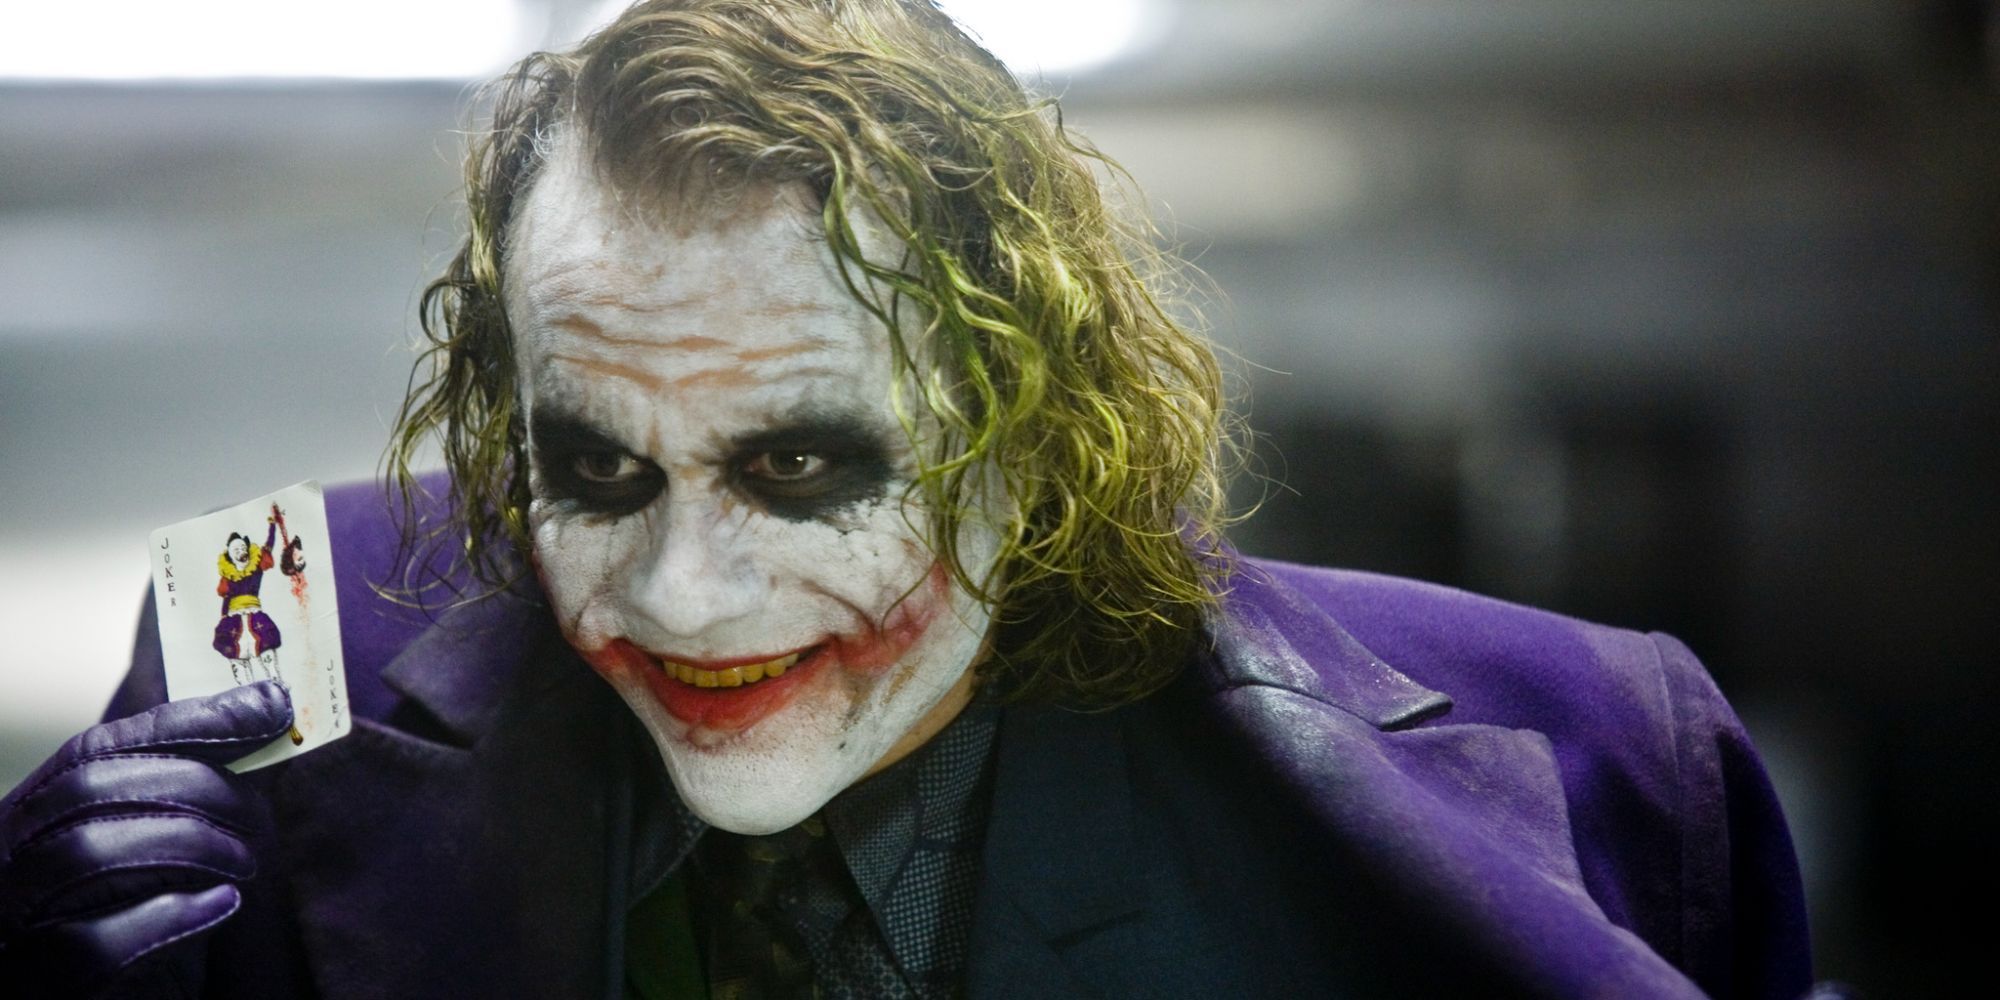 Joker smiling while showing off his card in The Dark Knight.